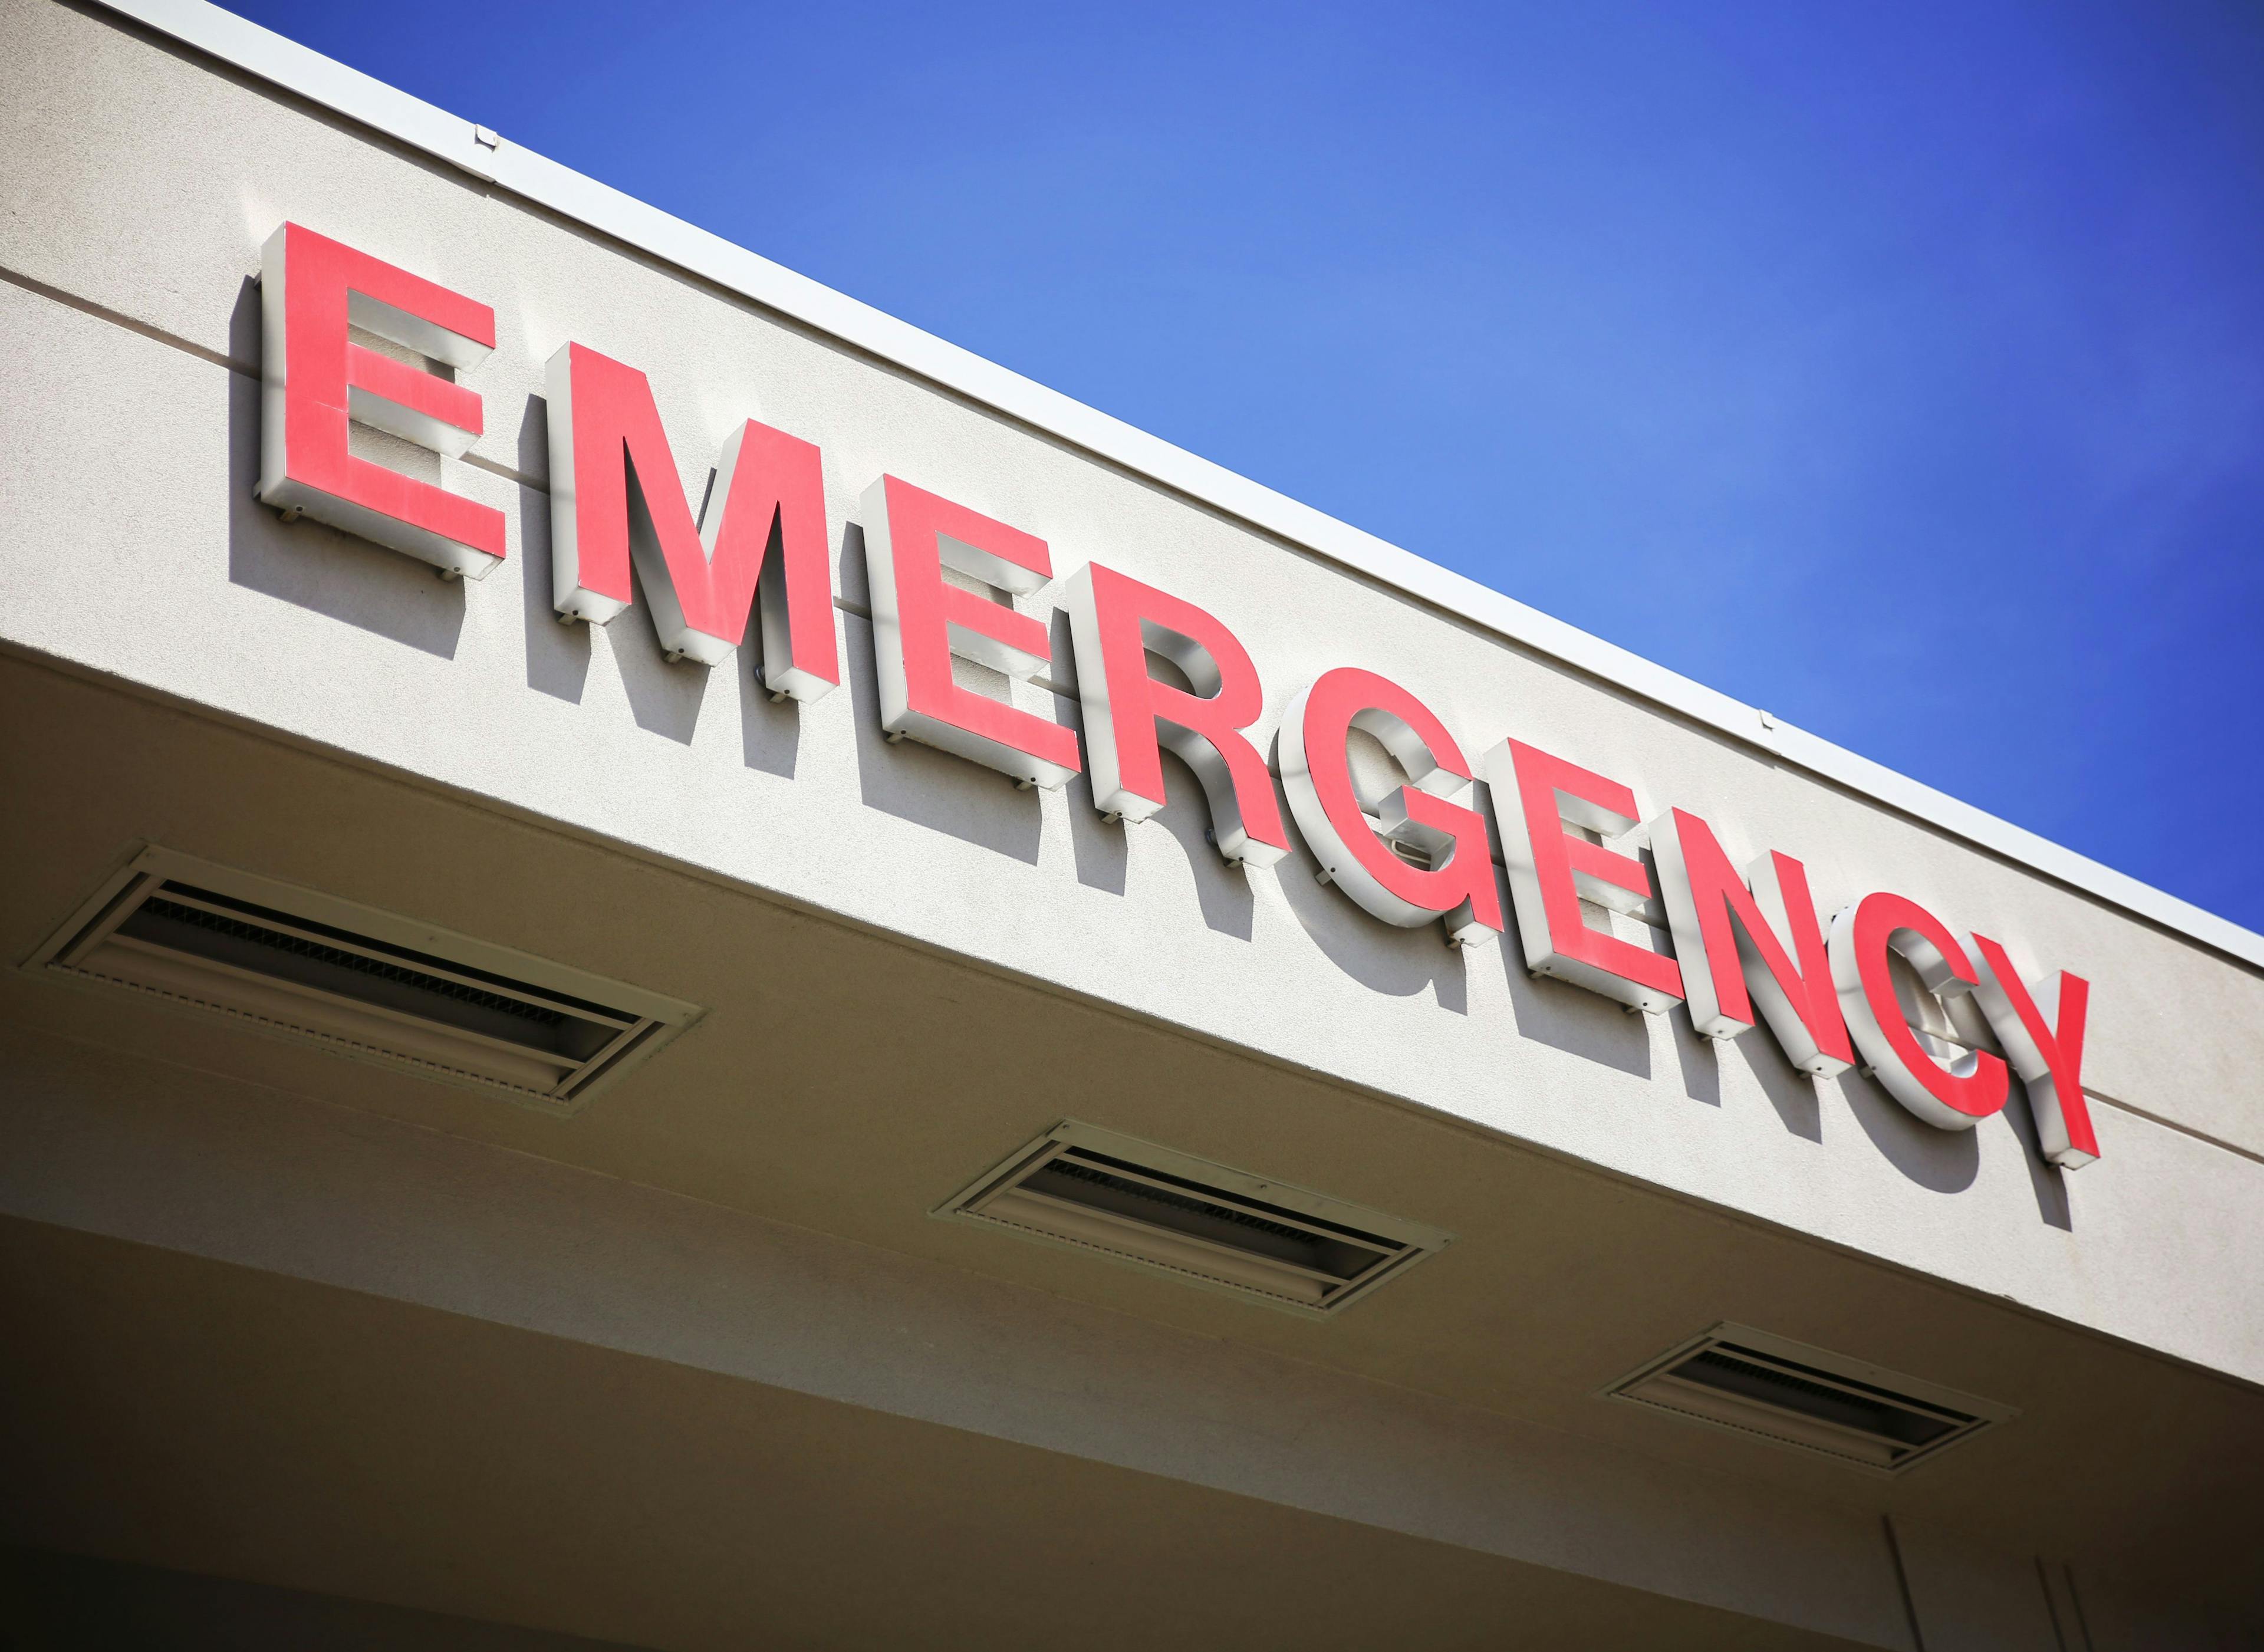 Upcoding not to blame for rising emergency department costs: ©Annette Shaff - stock.adobe.com